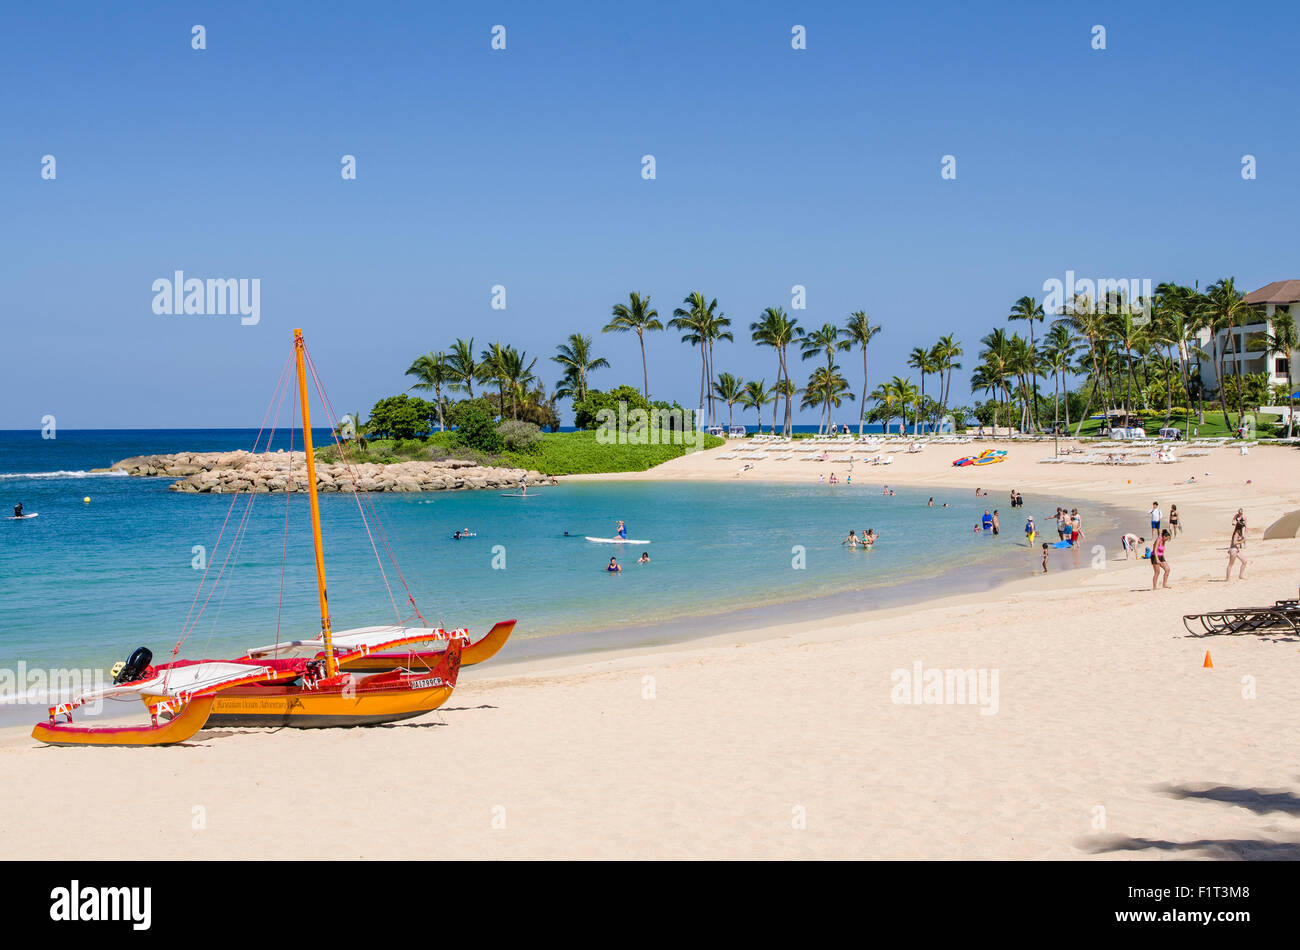 Ko Olina Beach, côte ouest, Oahu, Hawaii, United States of America, Pacifique Banque D'Images